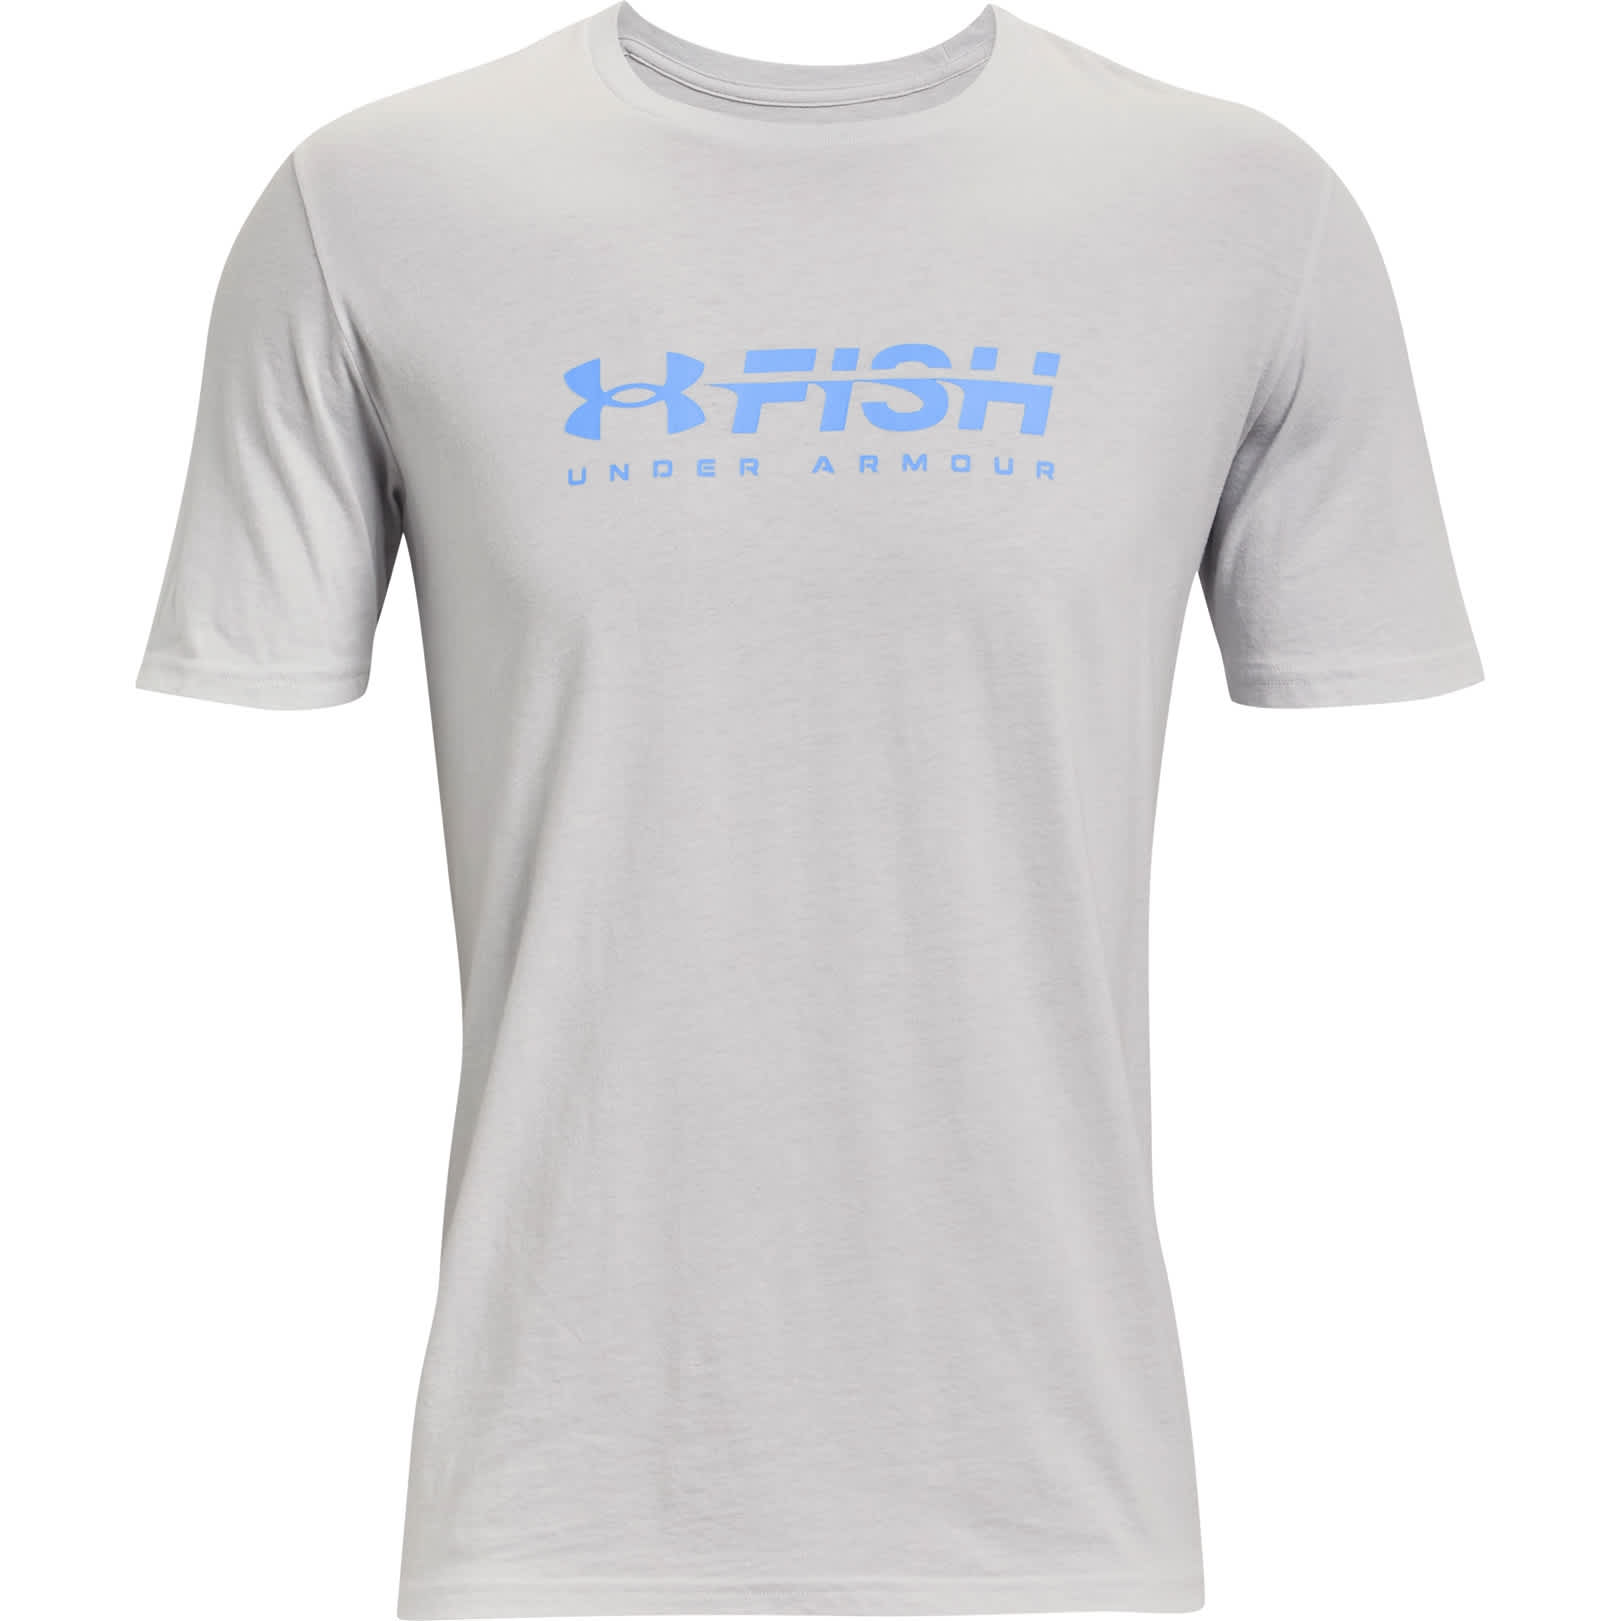 Men's Baseball Graphic Short Sleeve T-Shirt from Under Armour